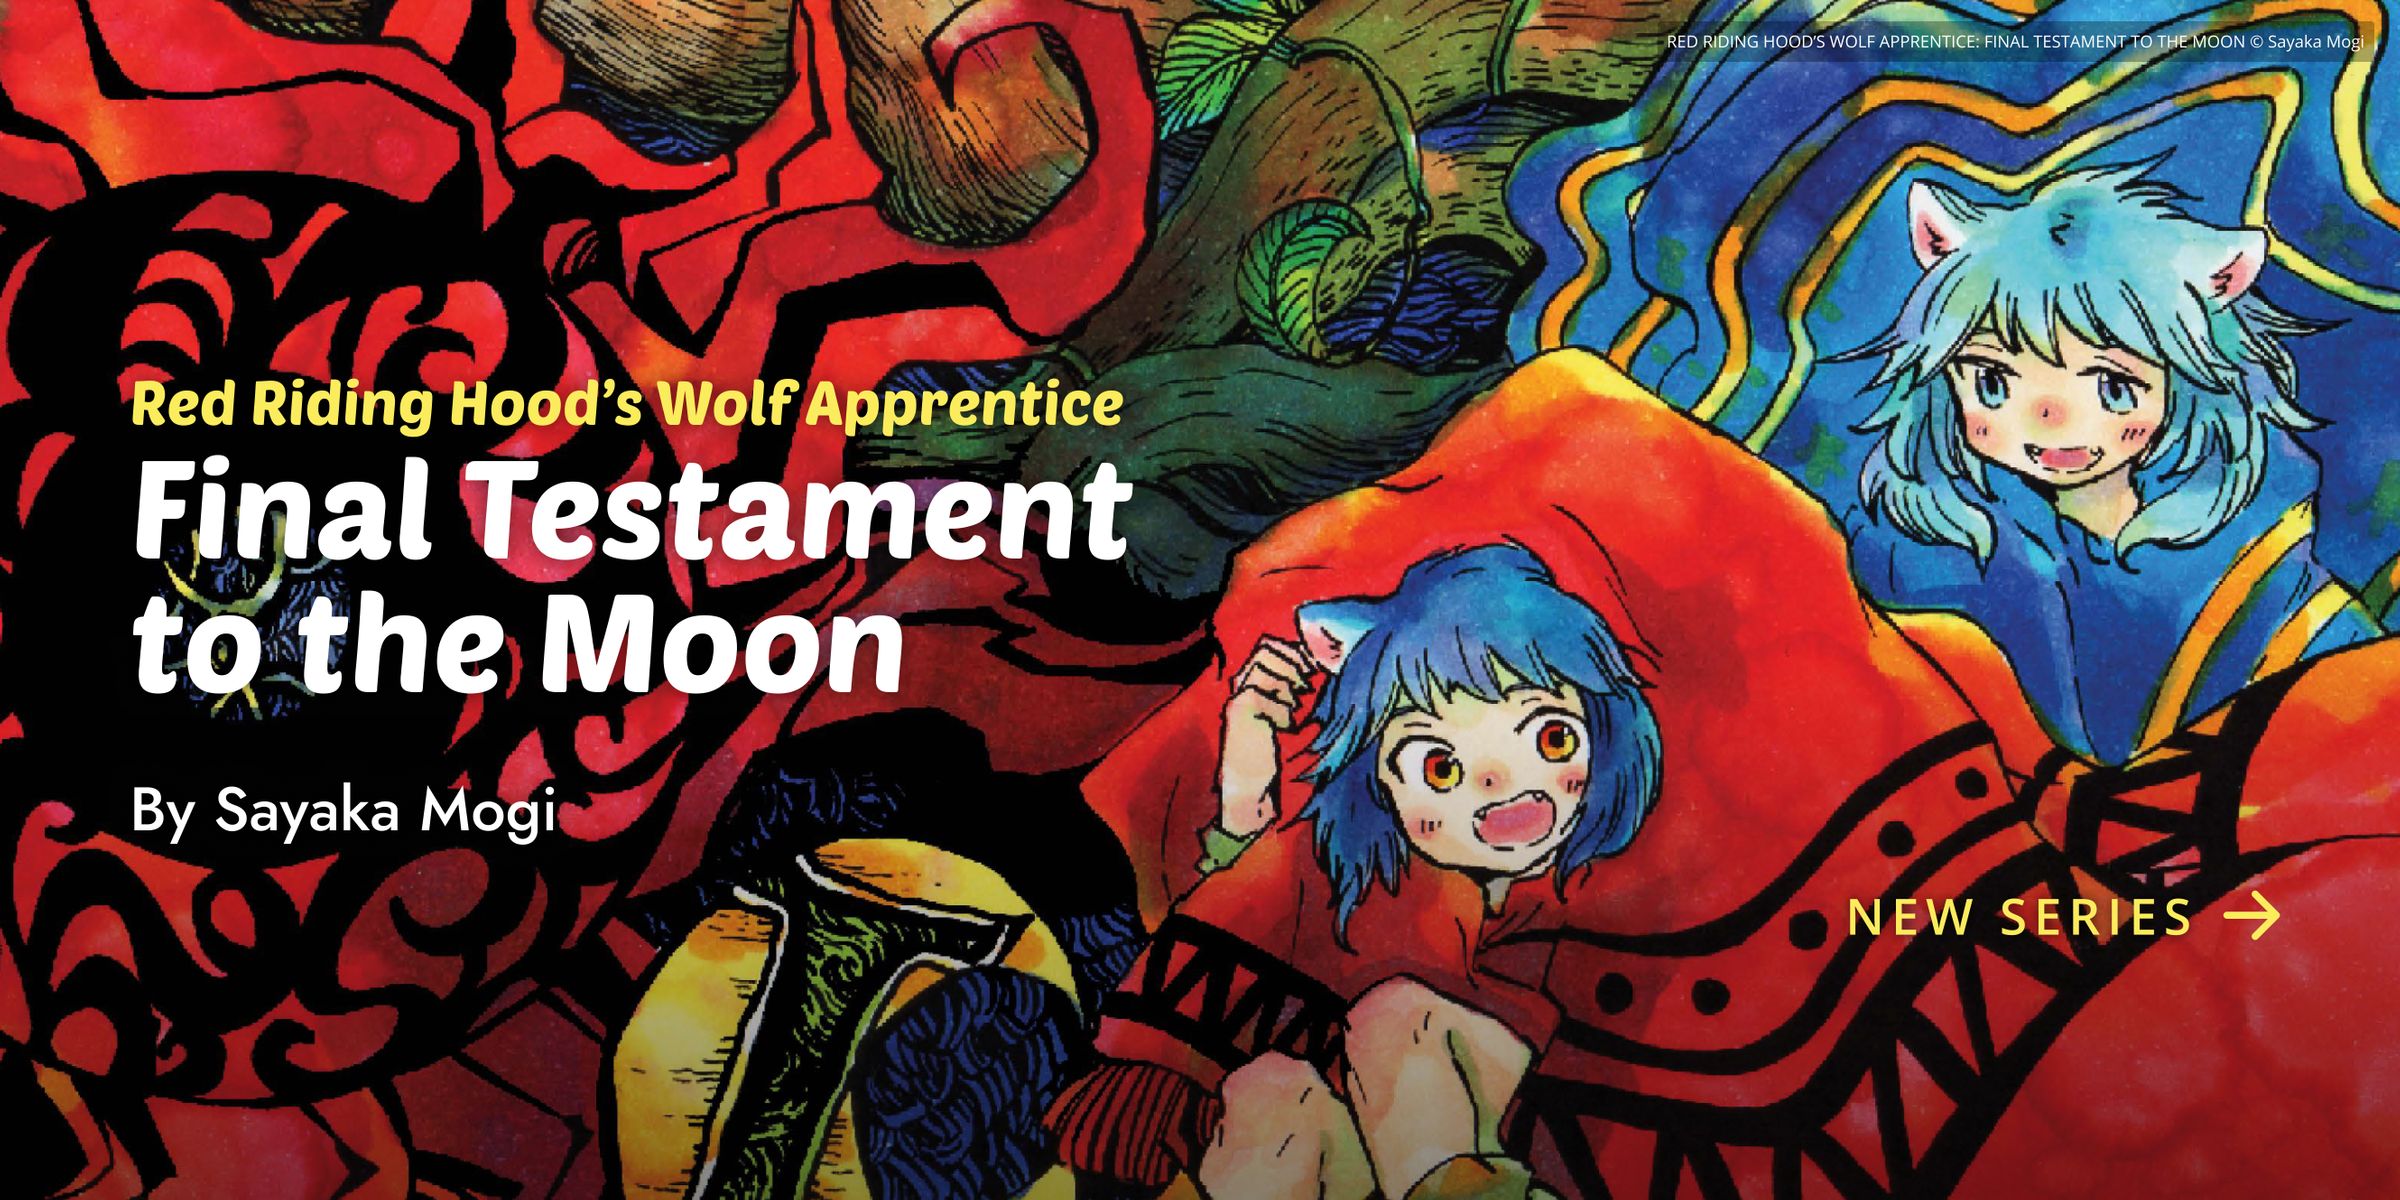 Red Riding Hood’s Wolf Apprentice: Final Testament to the Moon. By Sayaka Mogi. New Series.